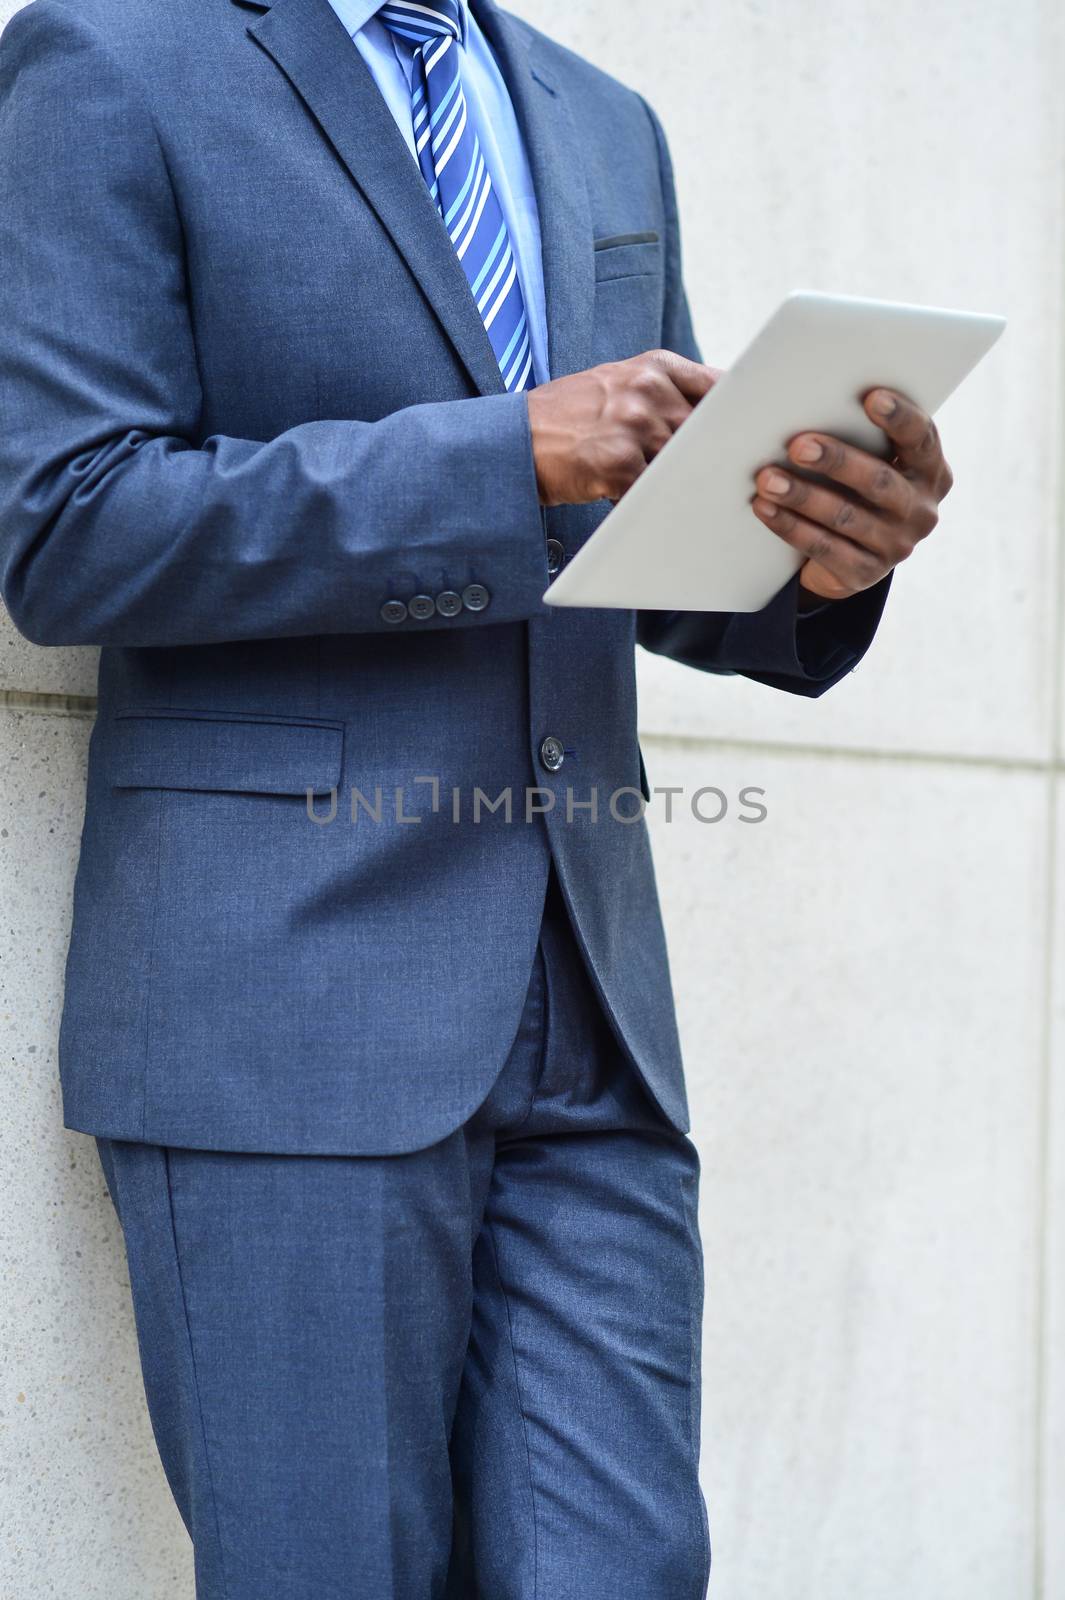 Hands of the businessman using a tablet PC by stockyimages